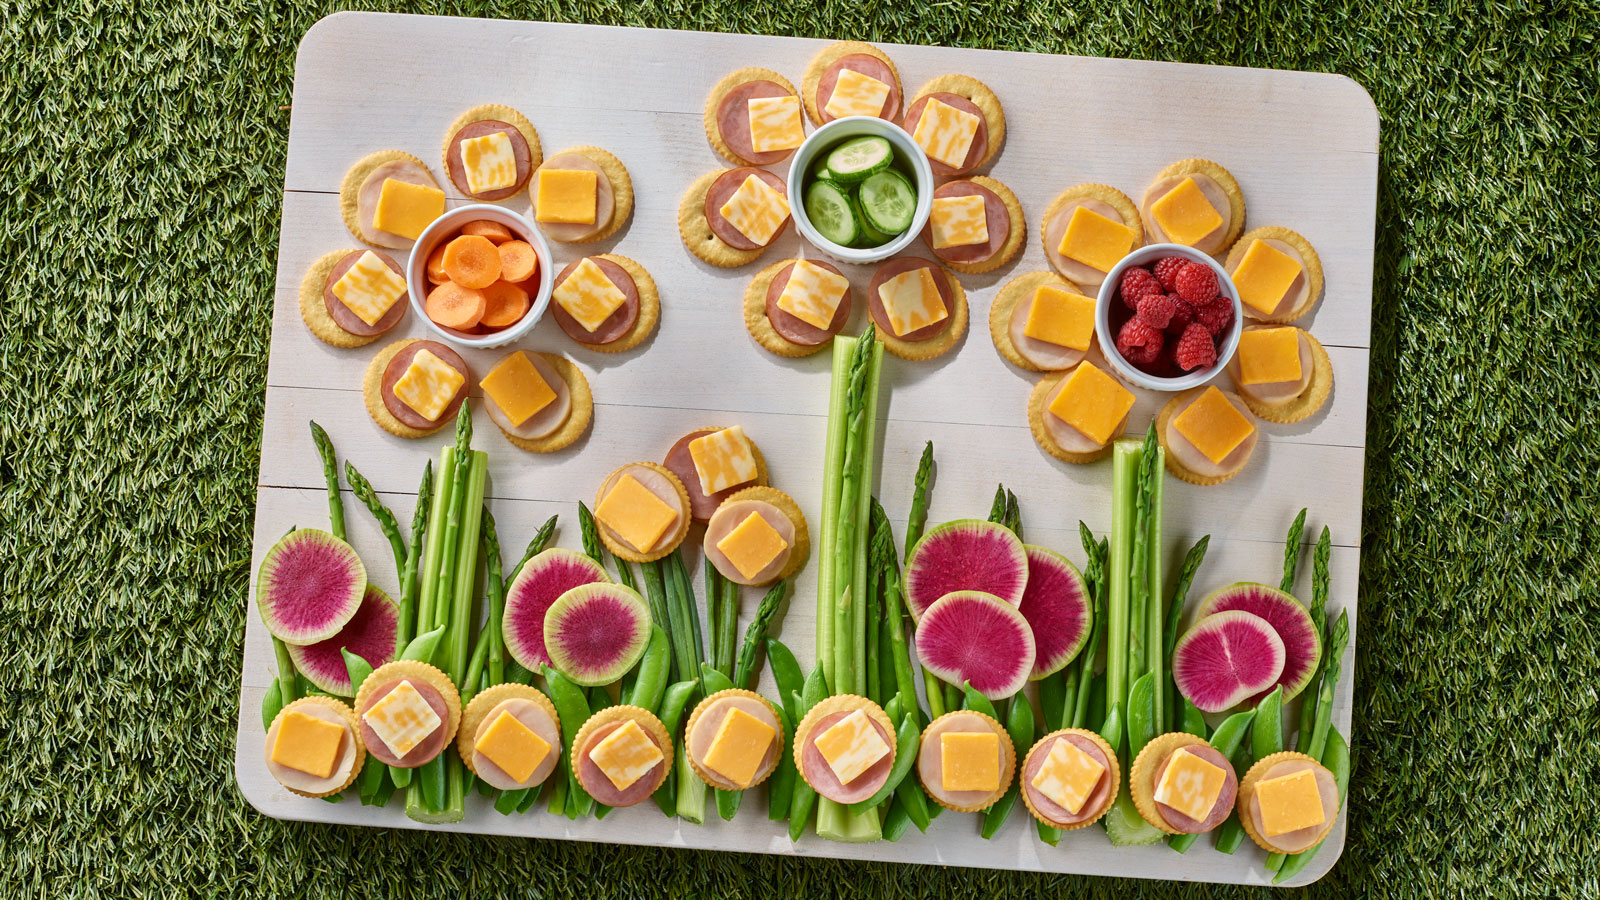 A snacking board displayed to look like flowers